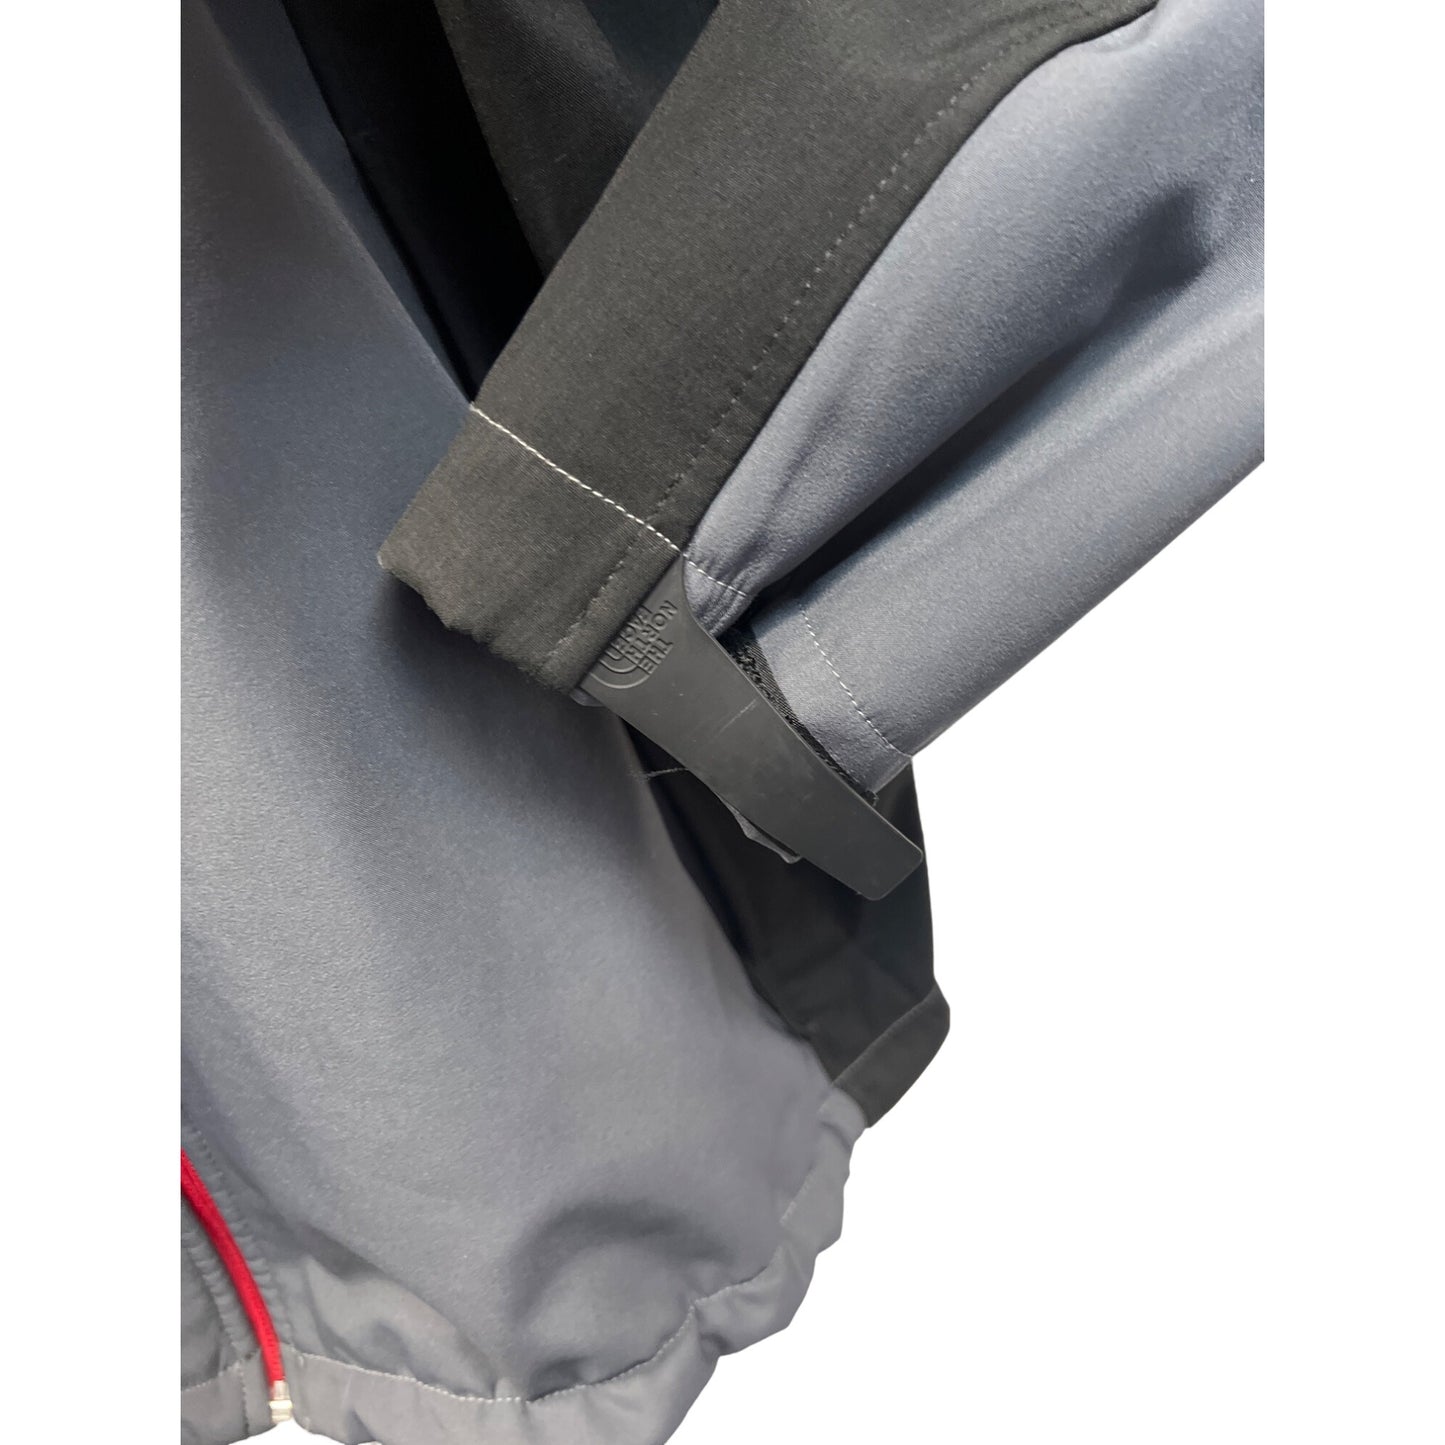 The North Face Softshell Full Zip Fleece Lined Gray and Red Jacket